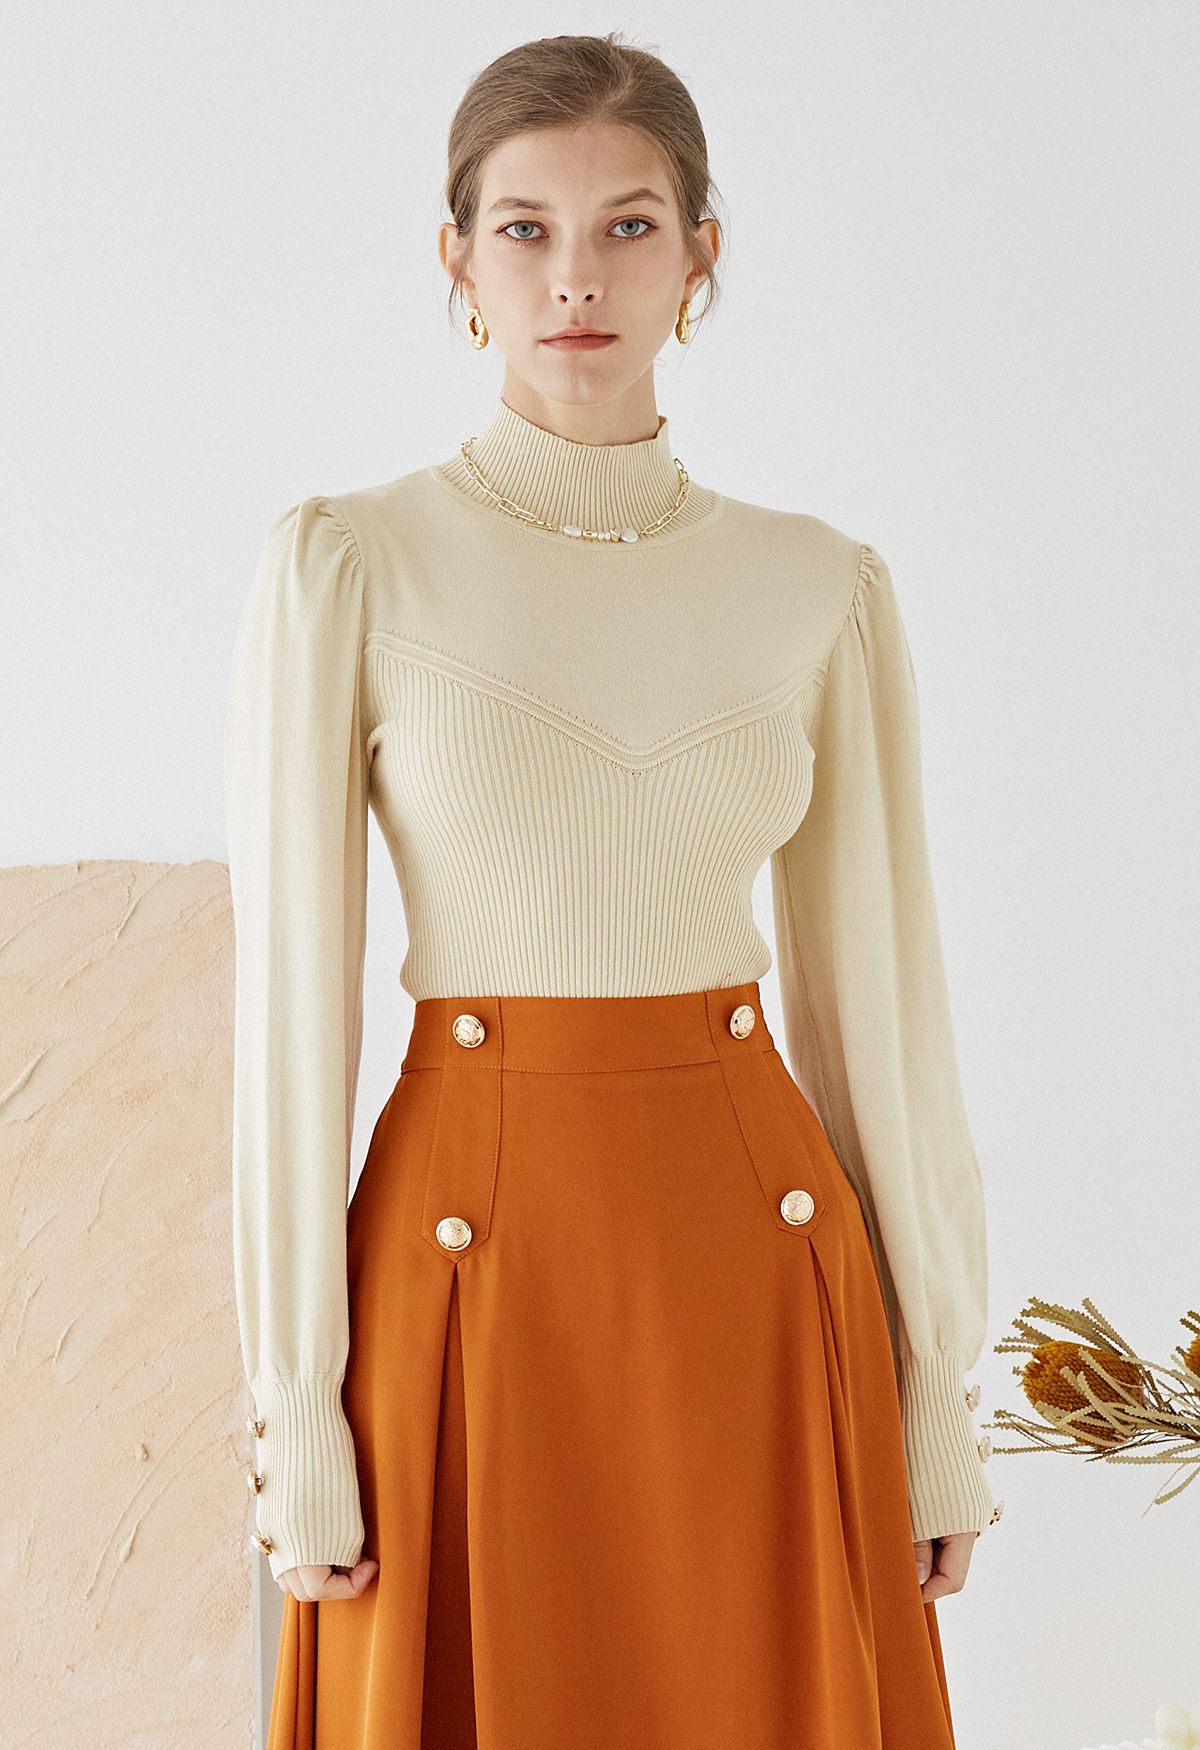 Rib Splicing Fitted Soft Knit Sweater in Cream - Retro, Indie and Unique  Fashion